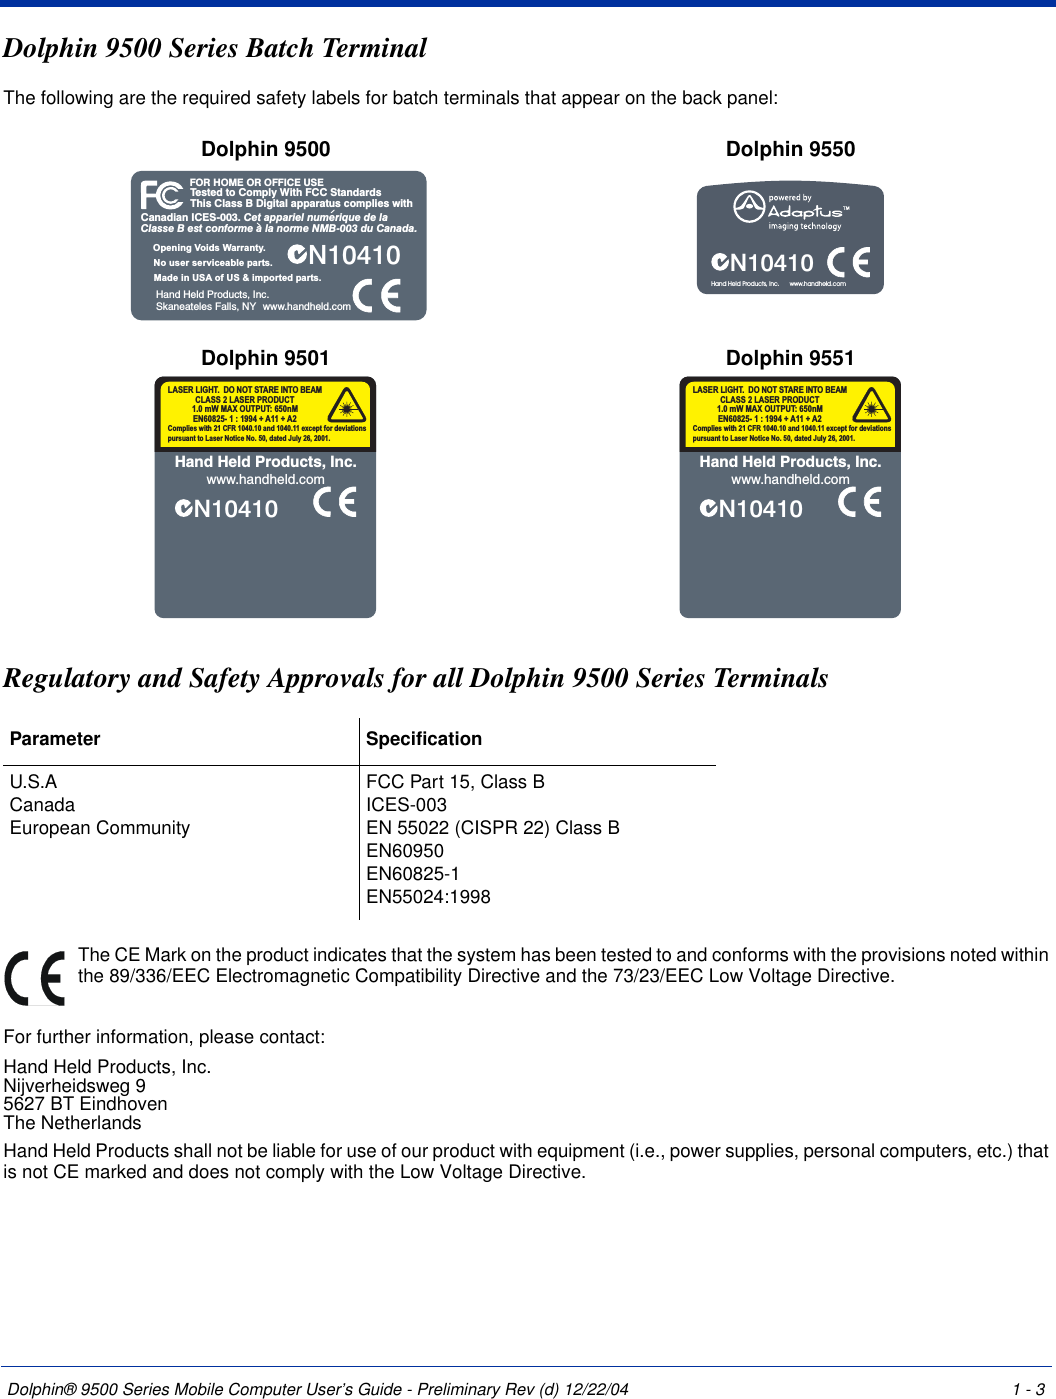 Dolphin® 9500 Series Mobile Computer User’s Guide - Preliminary Rev (d) 12/22/04 1 - 3Dolphin 9500 Series Batch Terminal The following are the required safety labels for batch terminals that appear on the back panel: Regulatory and Safety Approvals for all Dolphin 9500 Series Terminals The CE Mark on the product indicates that the system has been tested to and conforms with the provisions noted within the 89/336/EEC Electromagnetic Compatibility Directive and the 73/23/EEC Low Voltage Directive.For further information, please contact:Hand Held Products, Inc.Nijverheidsweg 95627 BT EindhovenThe NetherlandsHand Held Products shall not be liable for use of our product with equipment (i.e., power supplies, personal computers, etc.) that is not CE marked and does not comply with the Low Voltage Directive.Dolphin 9500 Dolphin 9550Dolphin 9501 Dolphin 9551Parameter SpecificationU.S.ACanadaEuropean CommunityFCC Part 15, Class BICES-003EN 55022 (CISPR 22) Class BEN60950EN60825-1EN55024:1998Tested to Comply With FCC StandardsThis Class B Digital apparatus complies withFOR HOME OR OFFICE USECanadian ICES-003. Cet appariel numerique de laClasse B est conforme a la norme NMB-003 du Canada.N10410Hand Held Products, Inc.Skaneateles Falls, NYMade in USA of US &amp; imported parts.No user serviceable parts.Opening Voids Warranty.www.handheld.comN10410Hand Held Products, Inc.      www.handheld.comN10410Hand Held Products, Inc.www.handheld.comComplies with 21 CFR 1040.10 and 1040.11 except for deviationspursuant to Laser Notice No. 50, dated July 26, 2001.LASER LIGHT. DO NOT STARE INTO BEAM1.0 mW MAX OUTPUT: 650nMEN60825- 1 : 1994 + A11 + A2CLASS 2 LASER PRODUCTN10410Hand Held Products, Inc.www.handheld.comComplies with 21 CFR 1040.10 and 1040.11 except for deviationspursuant to Laser Notice No. 50, dated July 26, 2001.LASER LIGHT. DO NOT STARE INTO BEAM1.0 mW MAX OUTPUT: 650nMEN60825- 1 : 1994 + A11 + A2CLASS 2 LASER PRODUCT